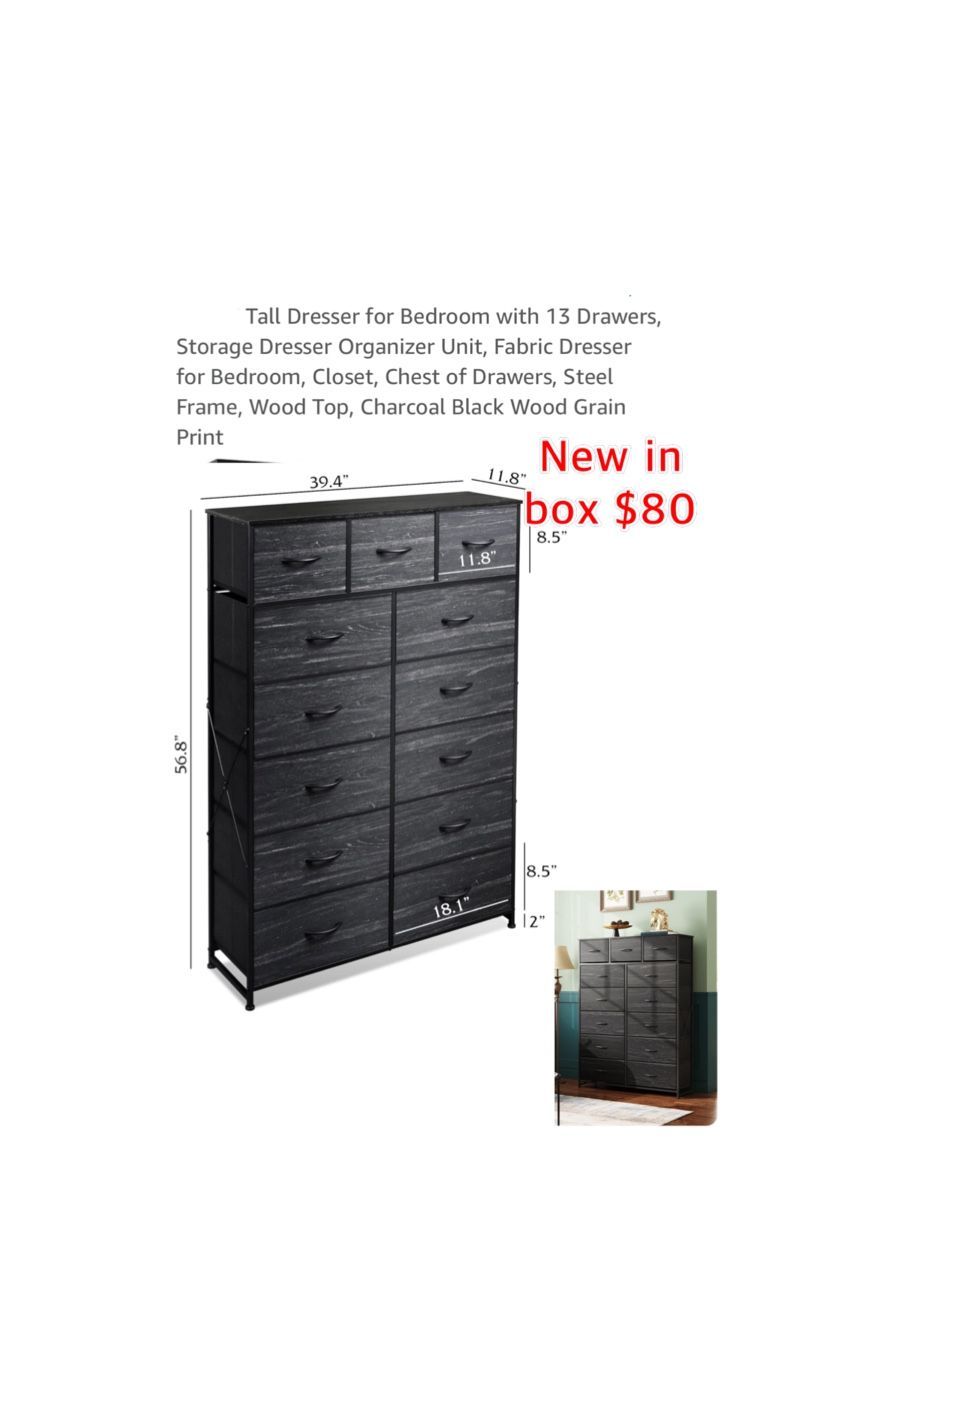 New in box Tall Dresser for Bedroom with 13 Drawers, Storage Dresser Organizer Fabric Chest of Drawers, Steel Frame, Wood Top, Charcoal Black Wood $80